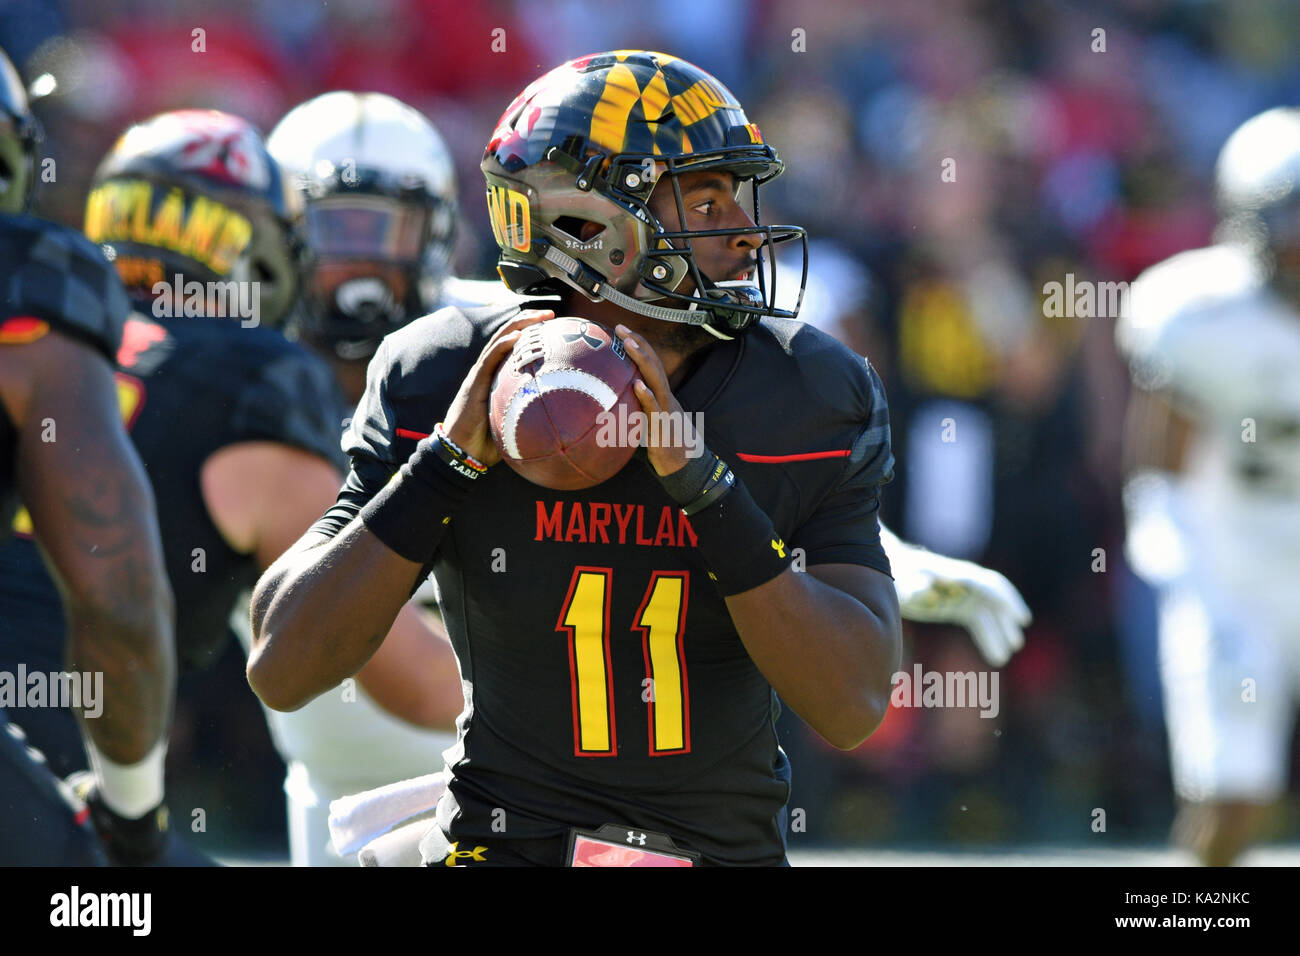 College Park, Maryland, USA. 23rd Sep, 2017. Maryland Terrapins quarterback KASIM HILL (11) throws a pass during a game played at Maryland Stadium at College Park, MD. UCF beat Maryland 38-10. Credit: Ken Inness/ZUMA Wire/Alamy Live News Stock Photo